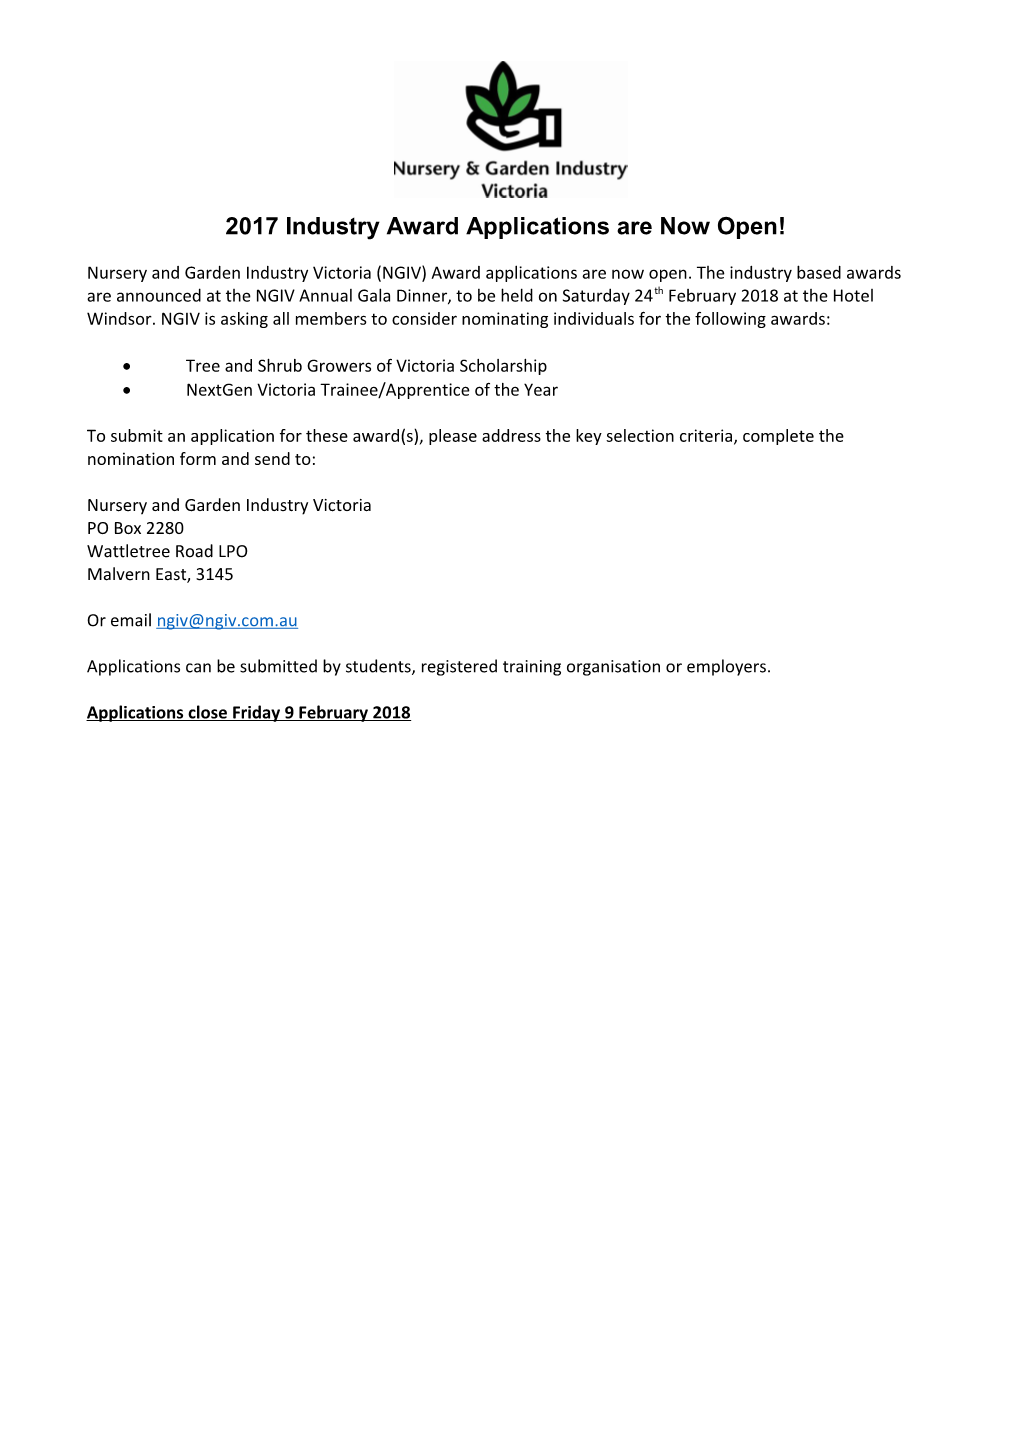 2017 Industry Award Applications Are Now Open!